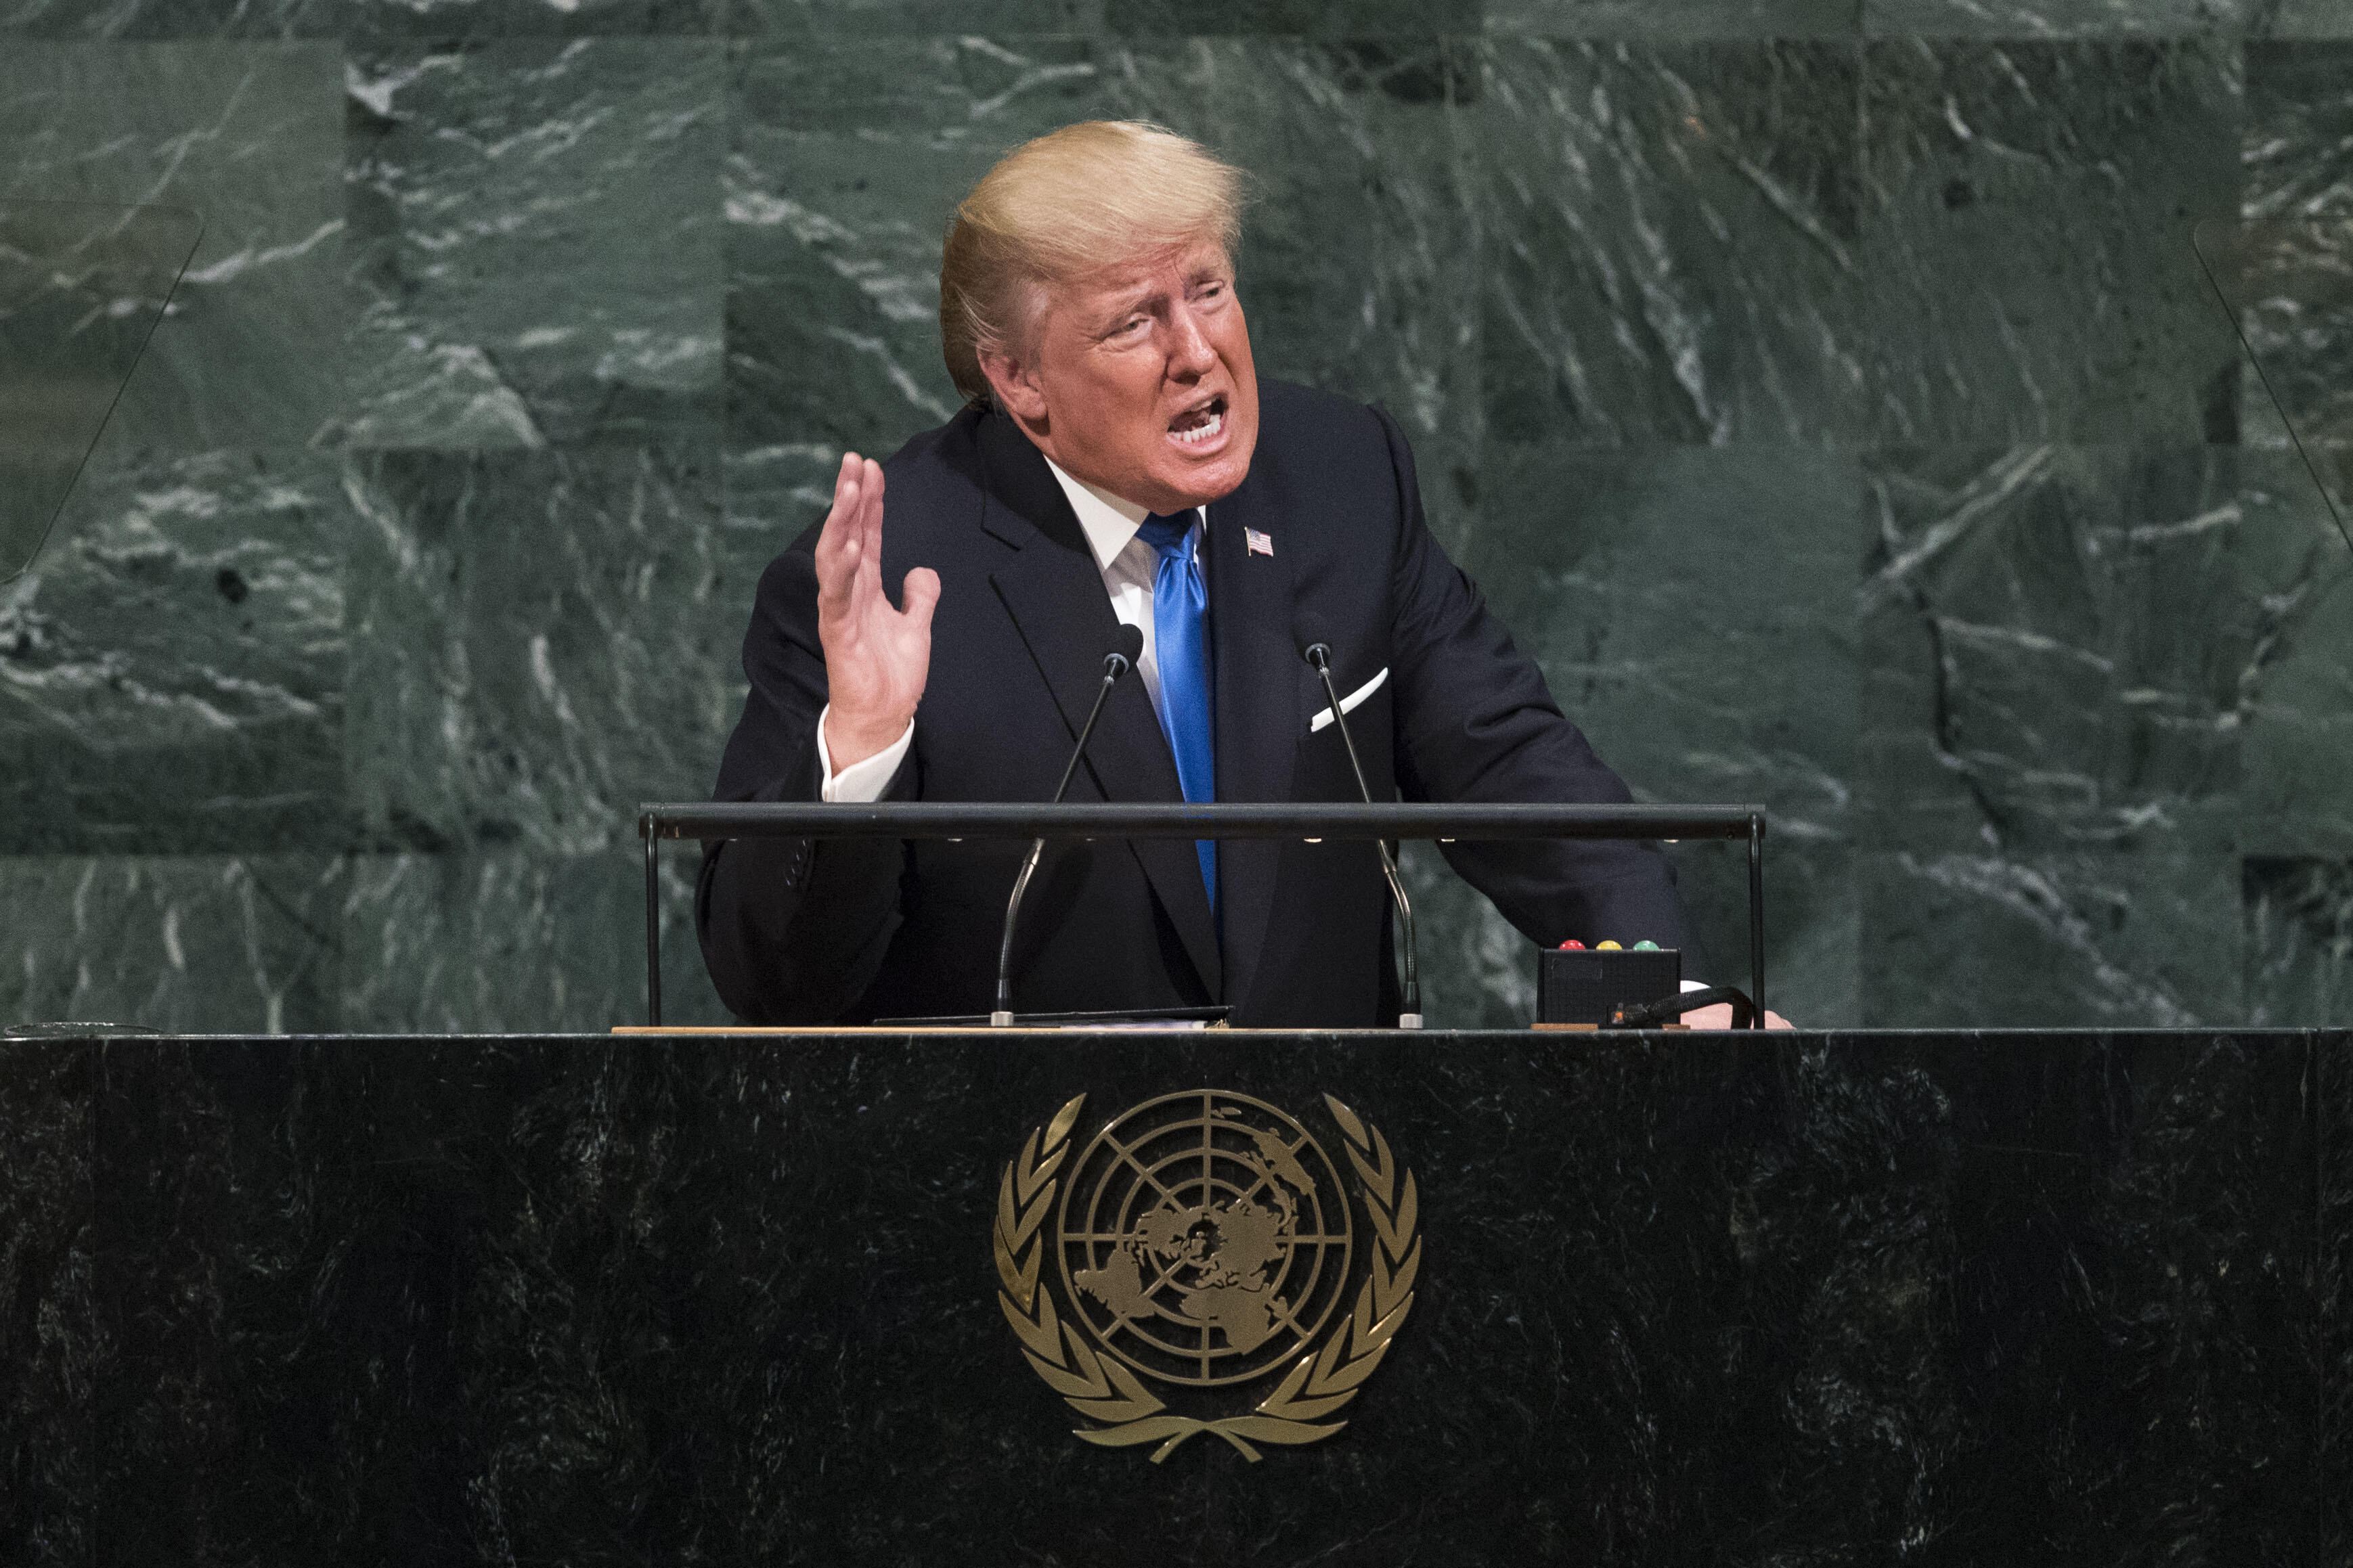 NEW YORK, NY - SEPTEMBER 19: U.S. President Donald Trump addresses the United Nations General Assembly at UN headquarters, September 19, 2017, in New York City. Among the issues facing the assembly, this year are North Korea's nuclear development, violence against the Rohingya Muslim minority in Myanmar and the debate over climate change. (Photo by Drew Angerer/Getty Images)